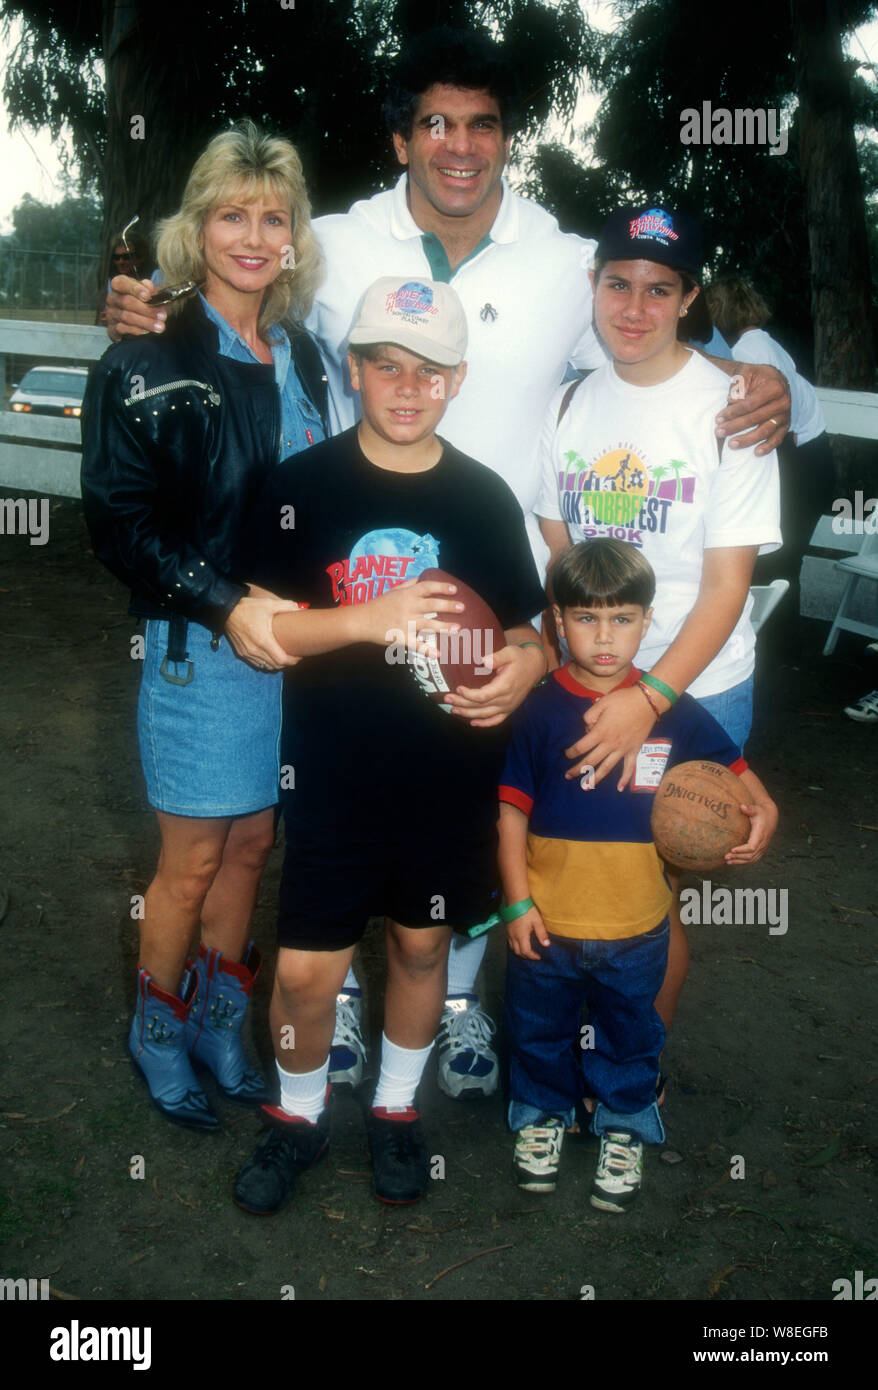 Pacific Palisades, California, USA 29th October 1994 Carla Ferrigno, husband Actor Lou Ferrigno, son Louis Ferrigno Jr., son Brent Ferrigno and daughter Shanna Ferrigno attend the Cricket Aid '94 Pro/Celebrity Match to Benefit Tuesday's Child and the Sunlight Mission on October 29, 1994 at the Will Rogers State Historic Park in Pacific Palisades, California, USA. Photo by Barry King/Alamy Stock Photo Stock Photo